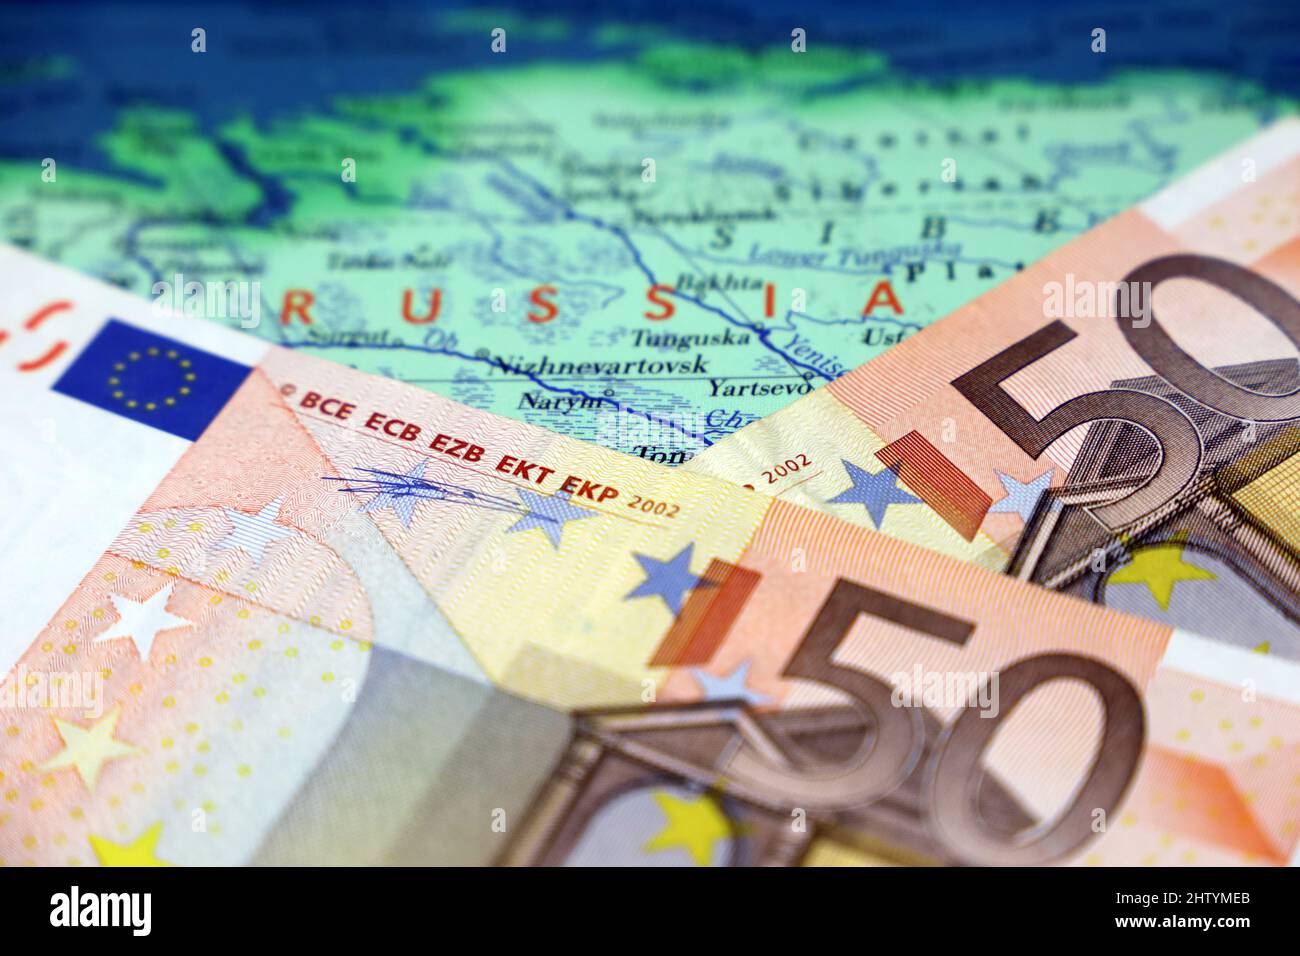 Euro banknotes on map of Russia. EU sanctions against the Russian economy, European currency ban Stock Photo